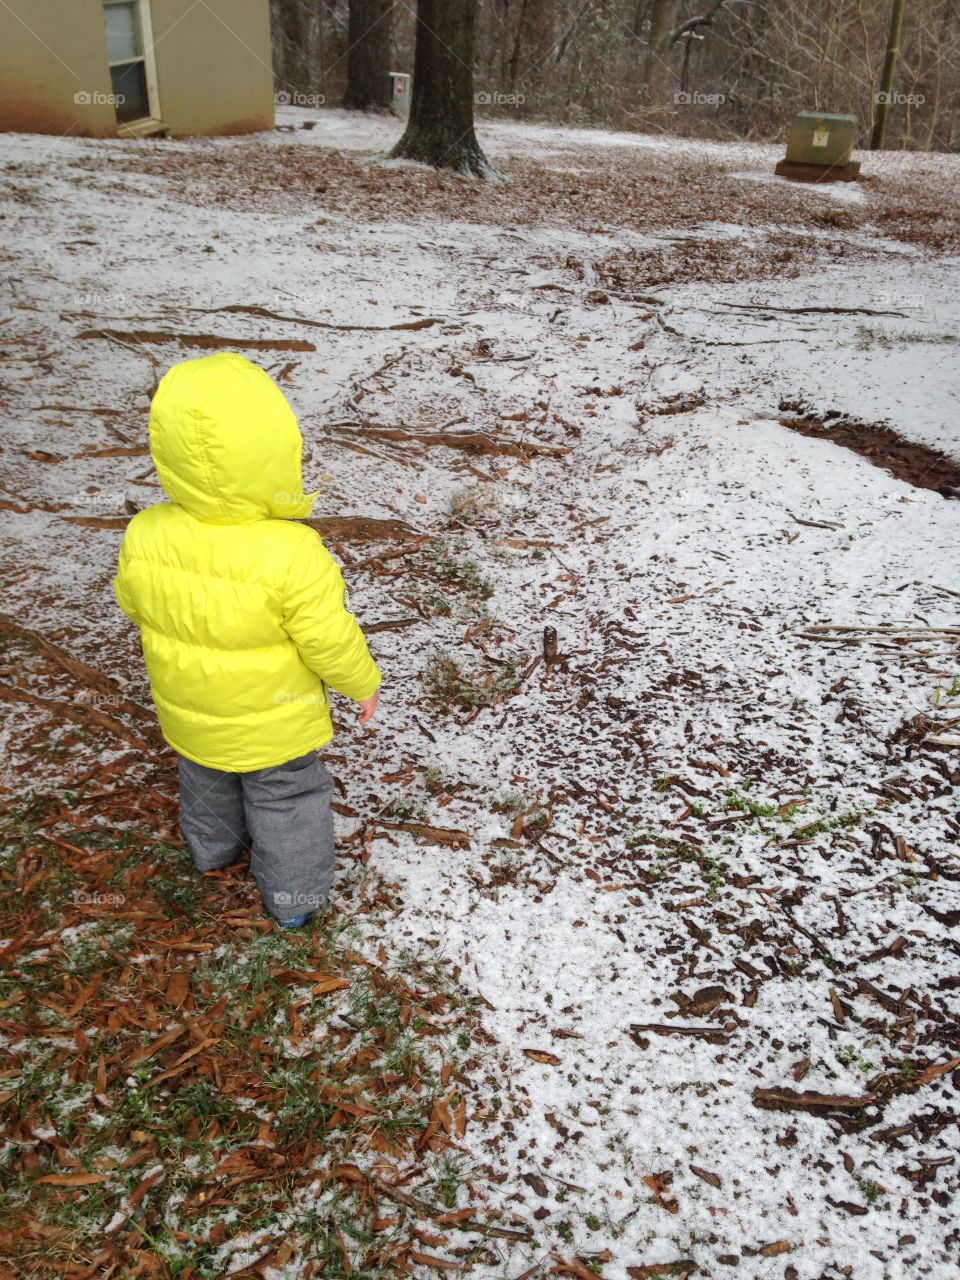 Toddler in the Snow